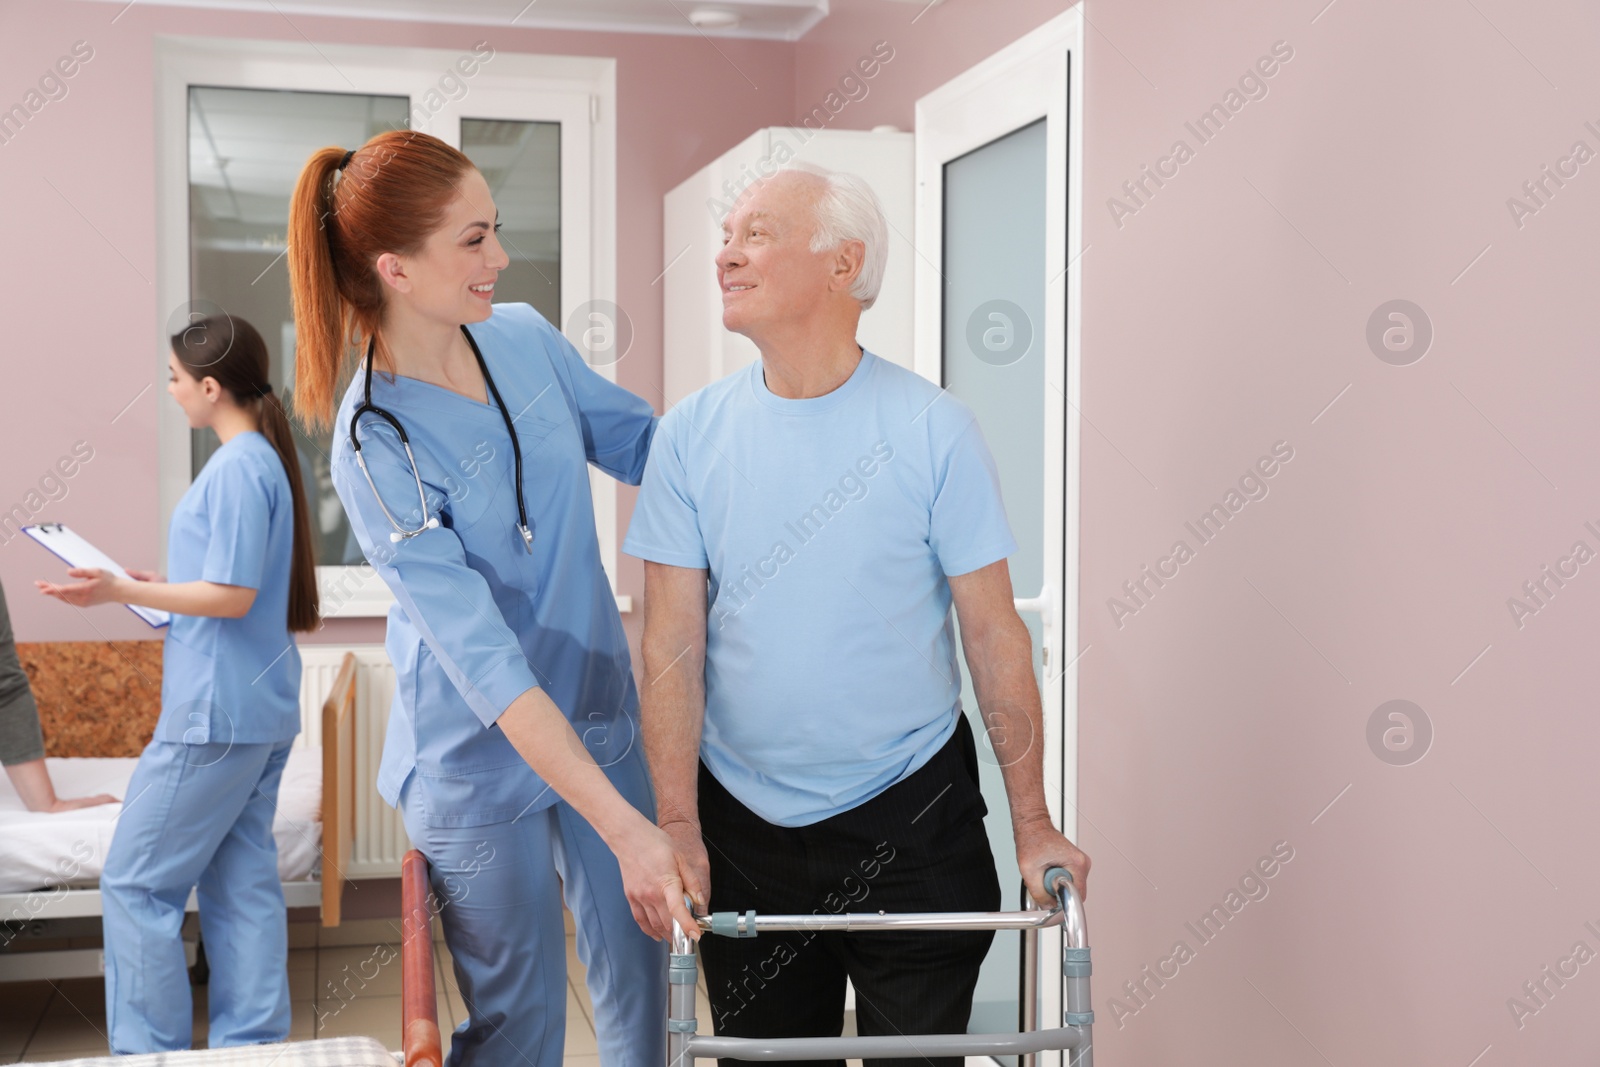 Photo of Nurse assisting senior patient with walker in hospital ward